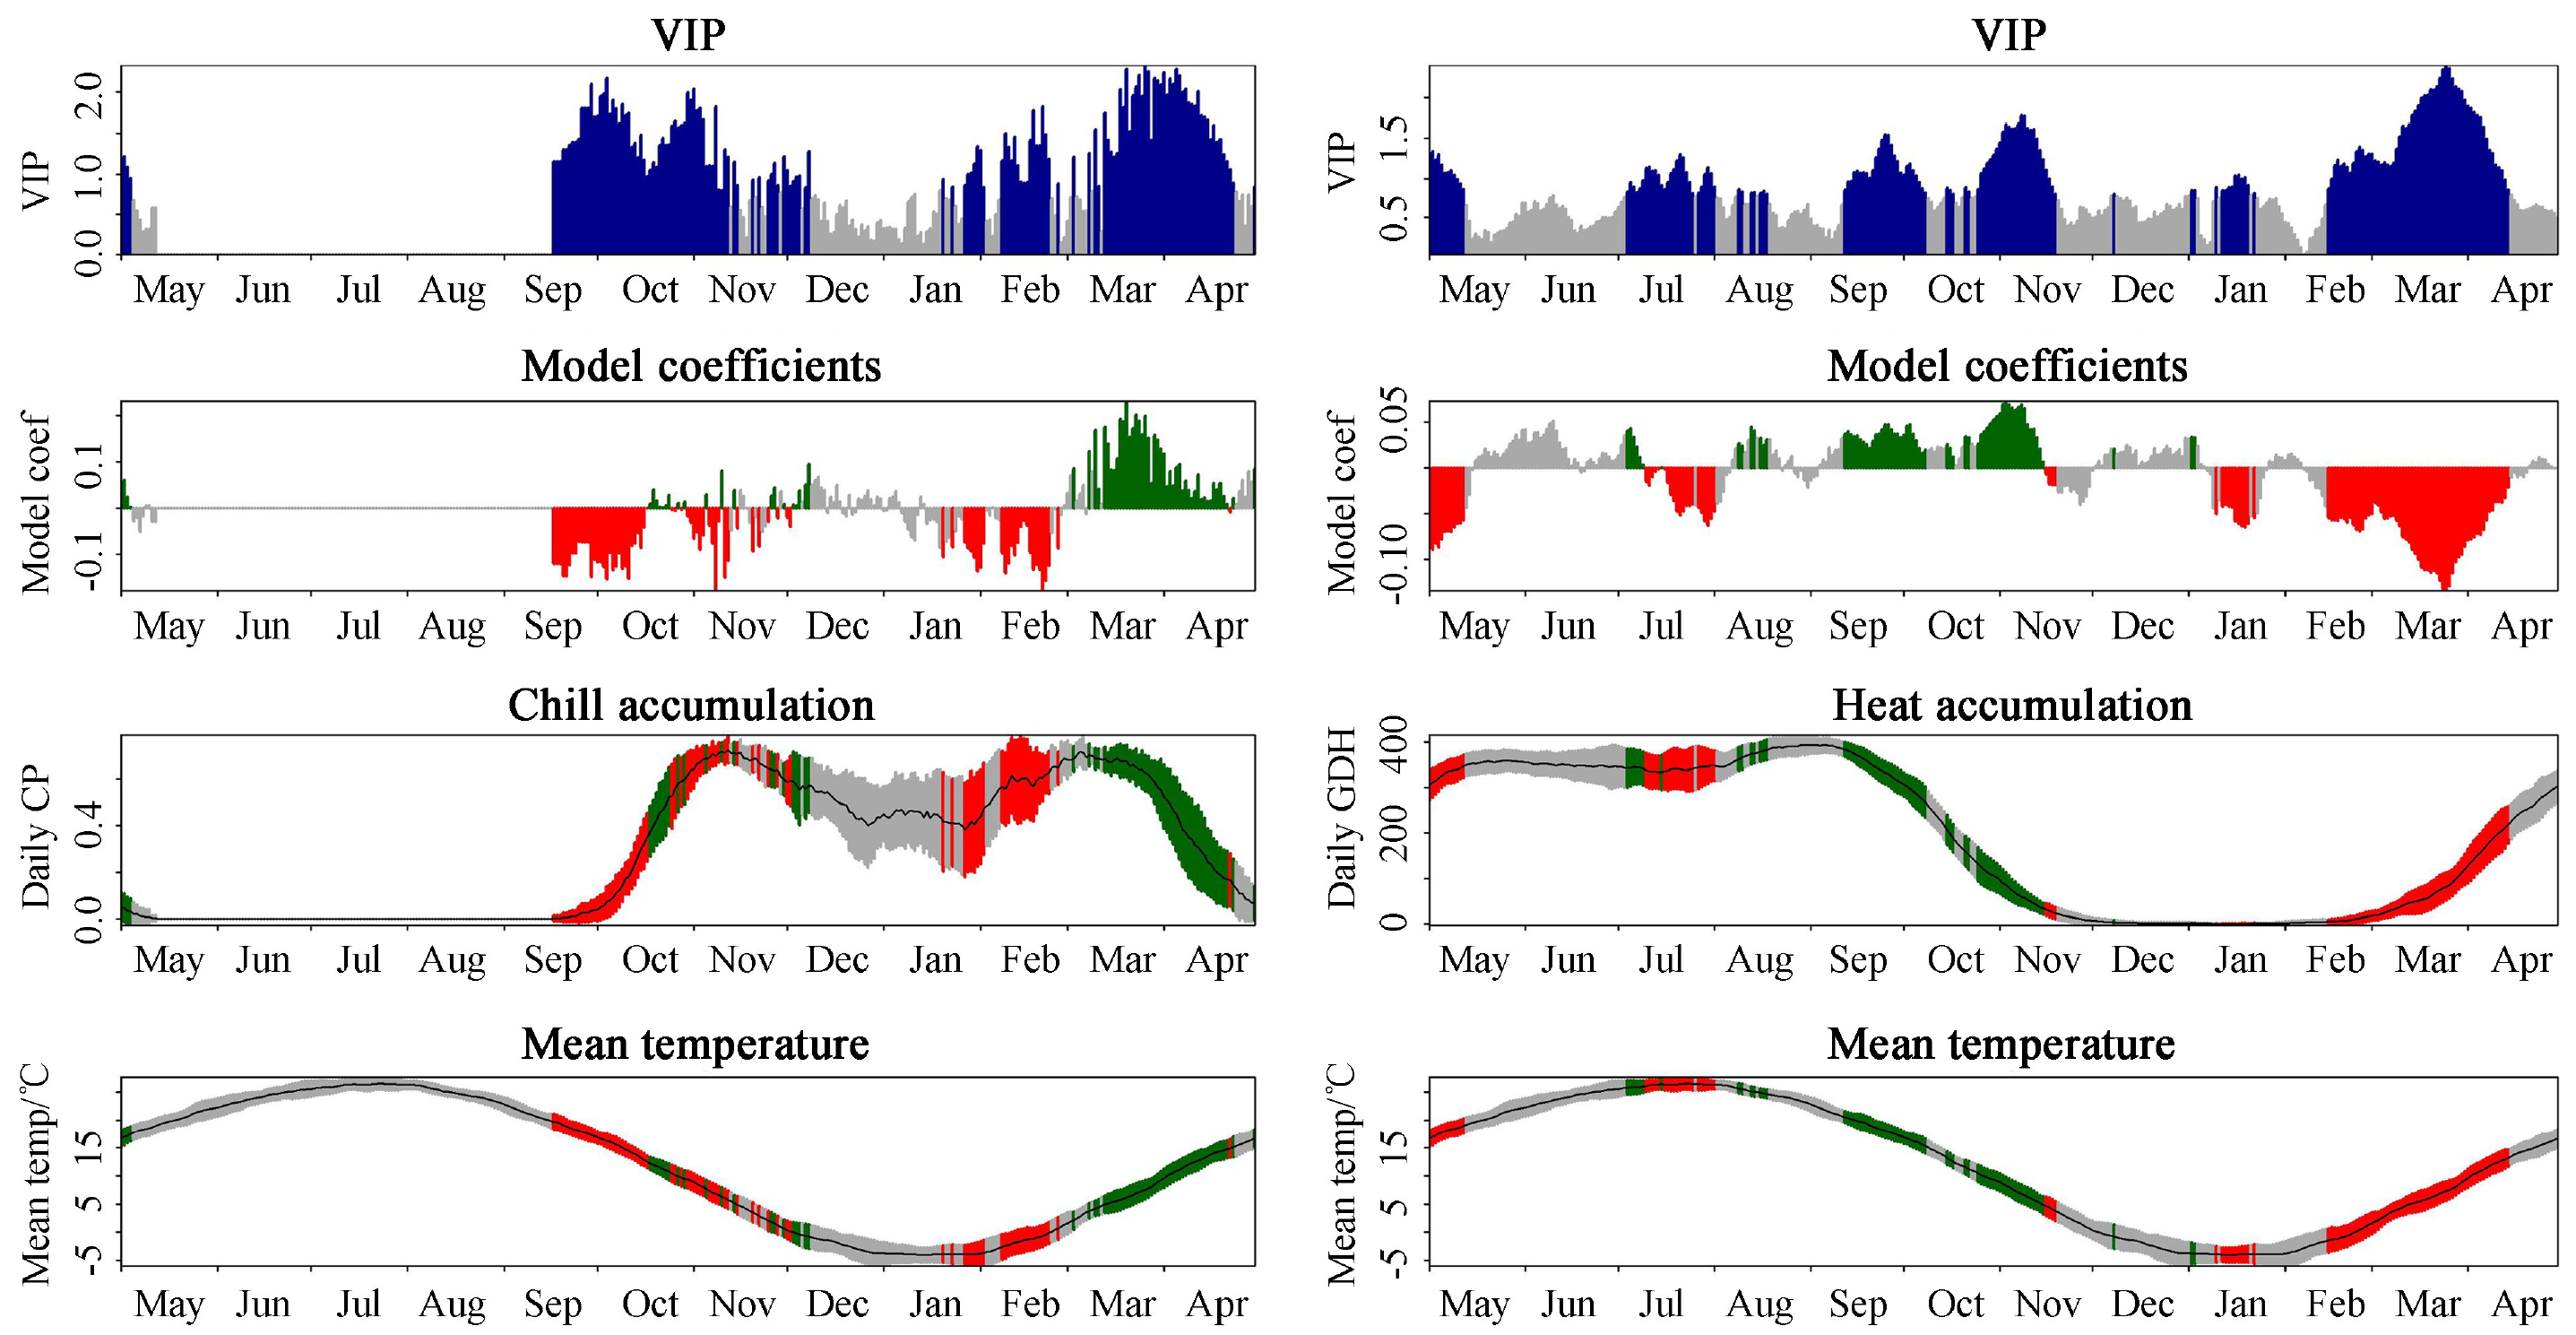 Results of a PLS analysis based on the relationship between daily chill (quantified with the Dynamic Model) and heat (quantified with the GDH model) accumulation and bloom of apricot (Prunus armeniaca) in Beijing, China (Guo et al., 2014b)